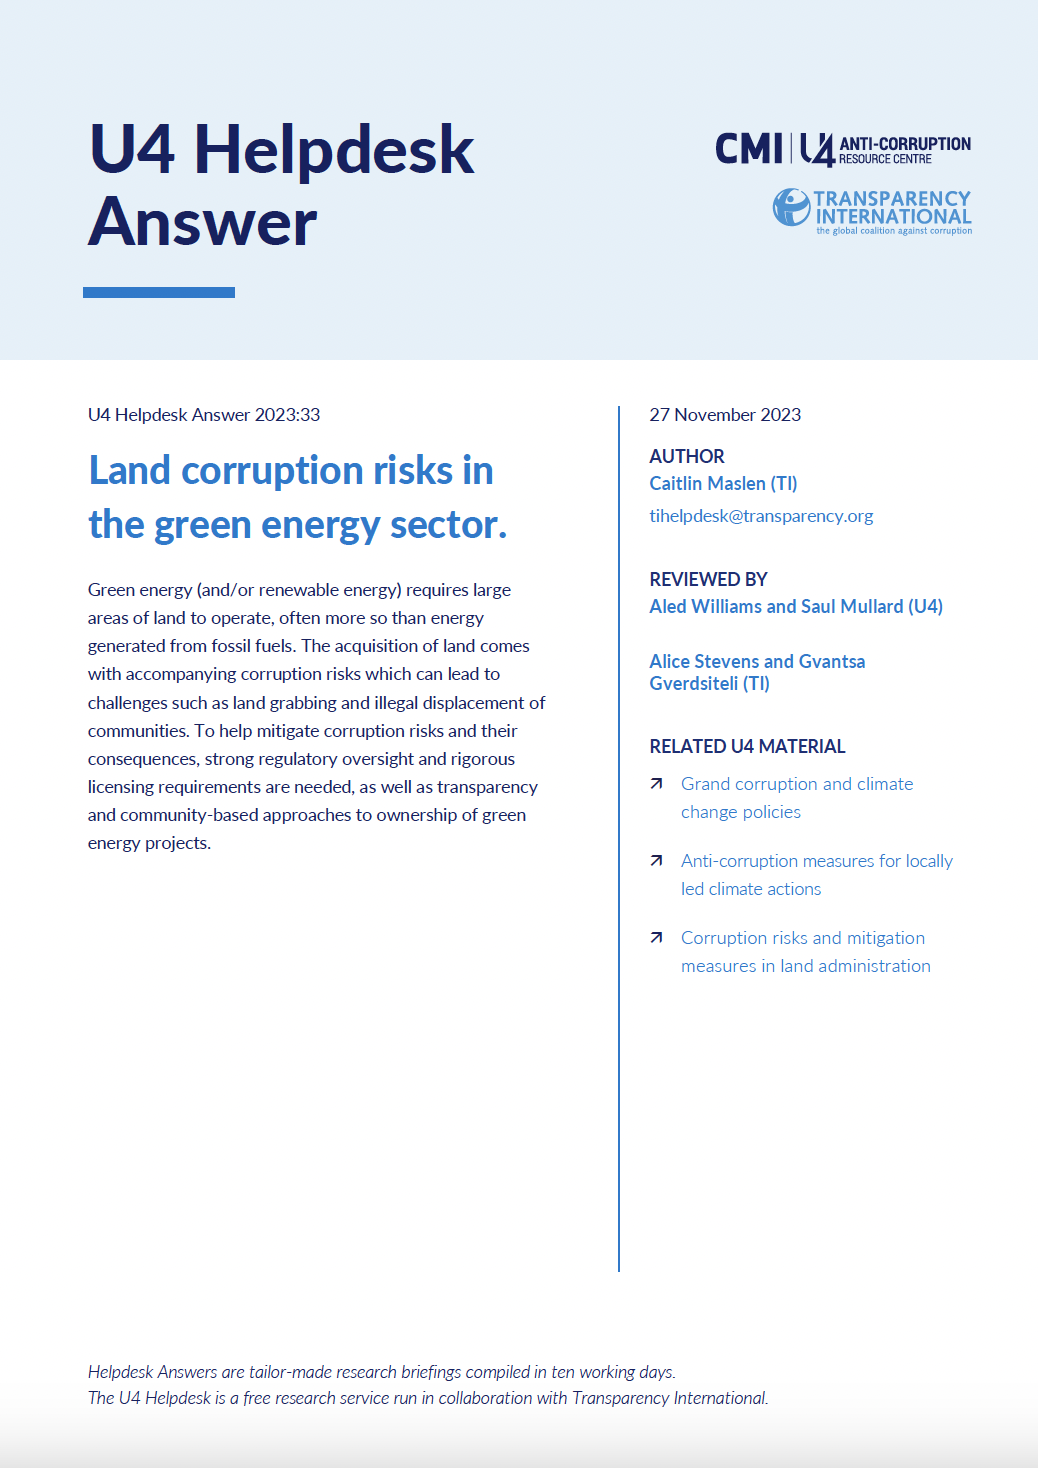 Land corruption risks in the green energy sector